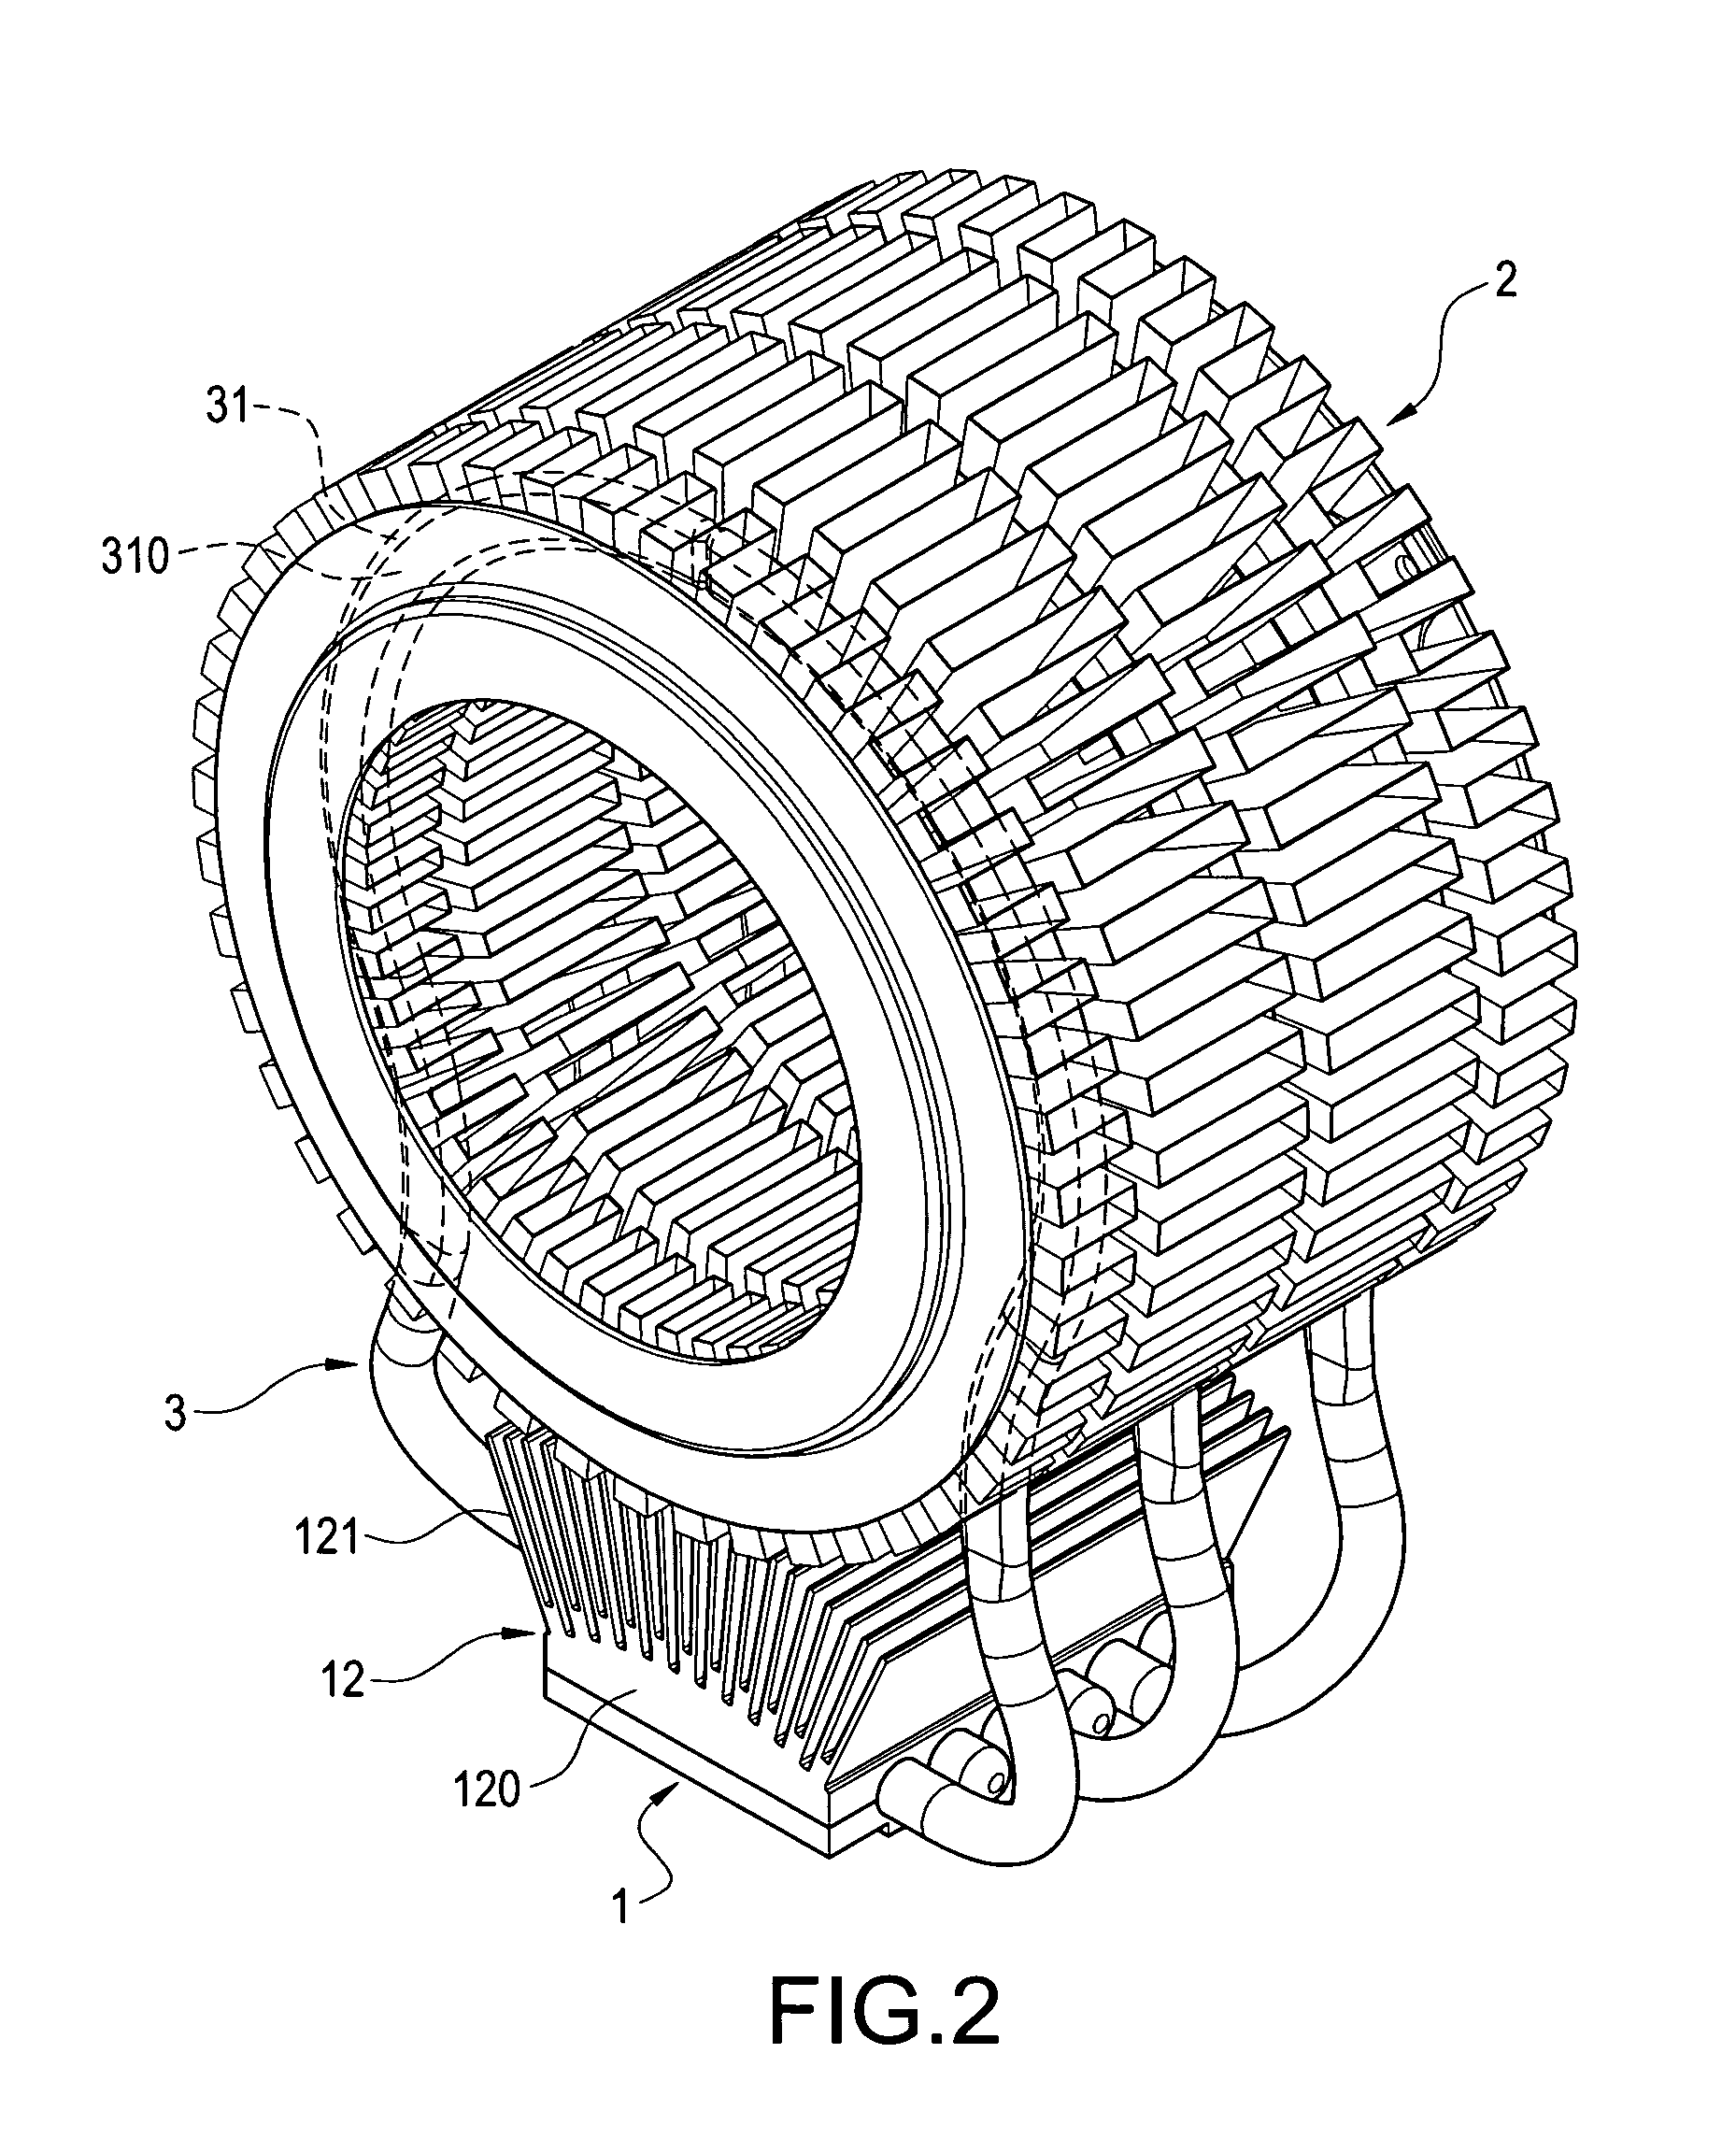 Cooling device with ringed fins